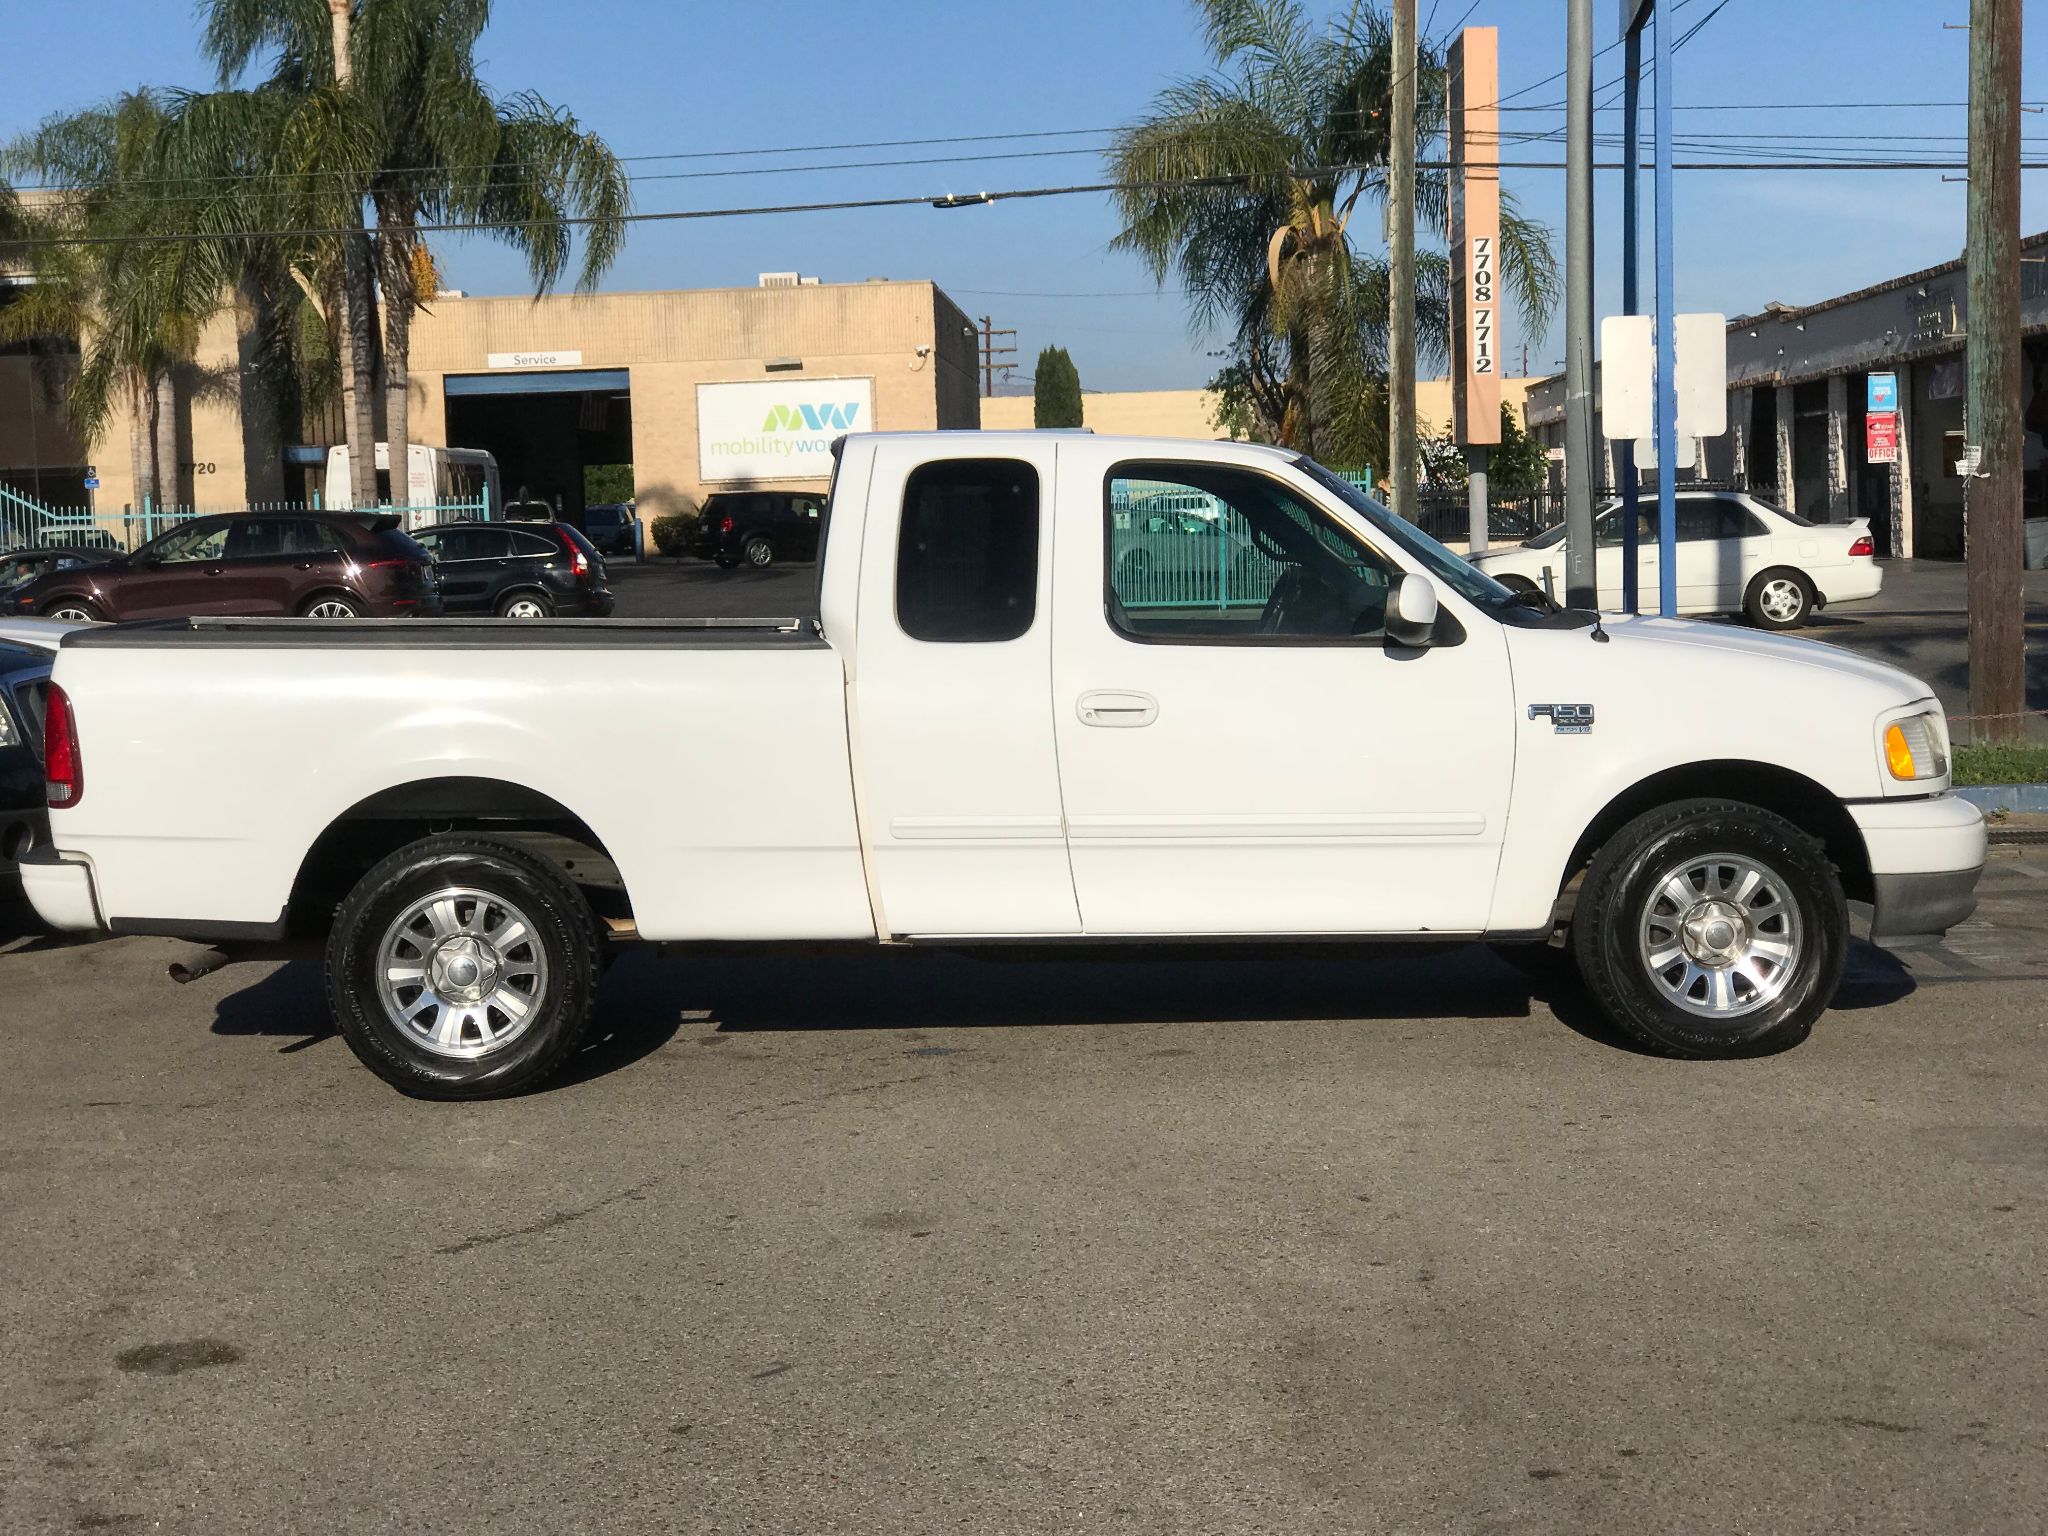 Used 2002 Ford F-150 XLT at City Cars Warehouse INC 2002 Ford F 150 Xlt 7700 Specs